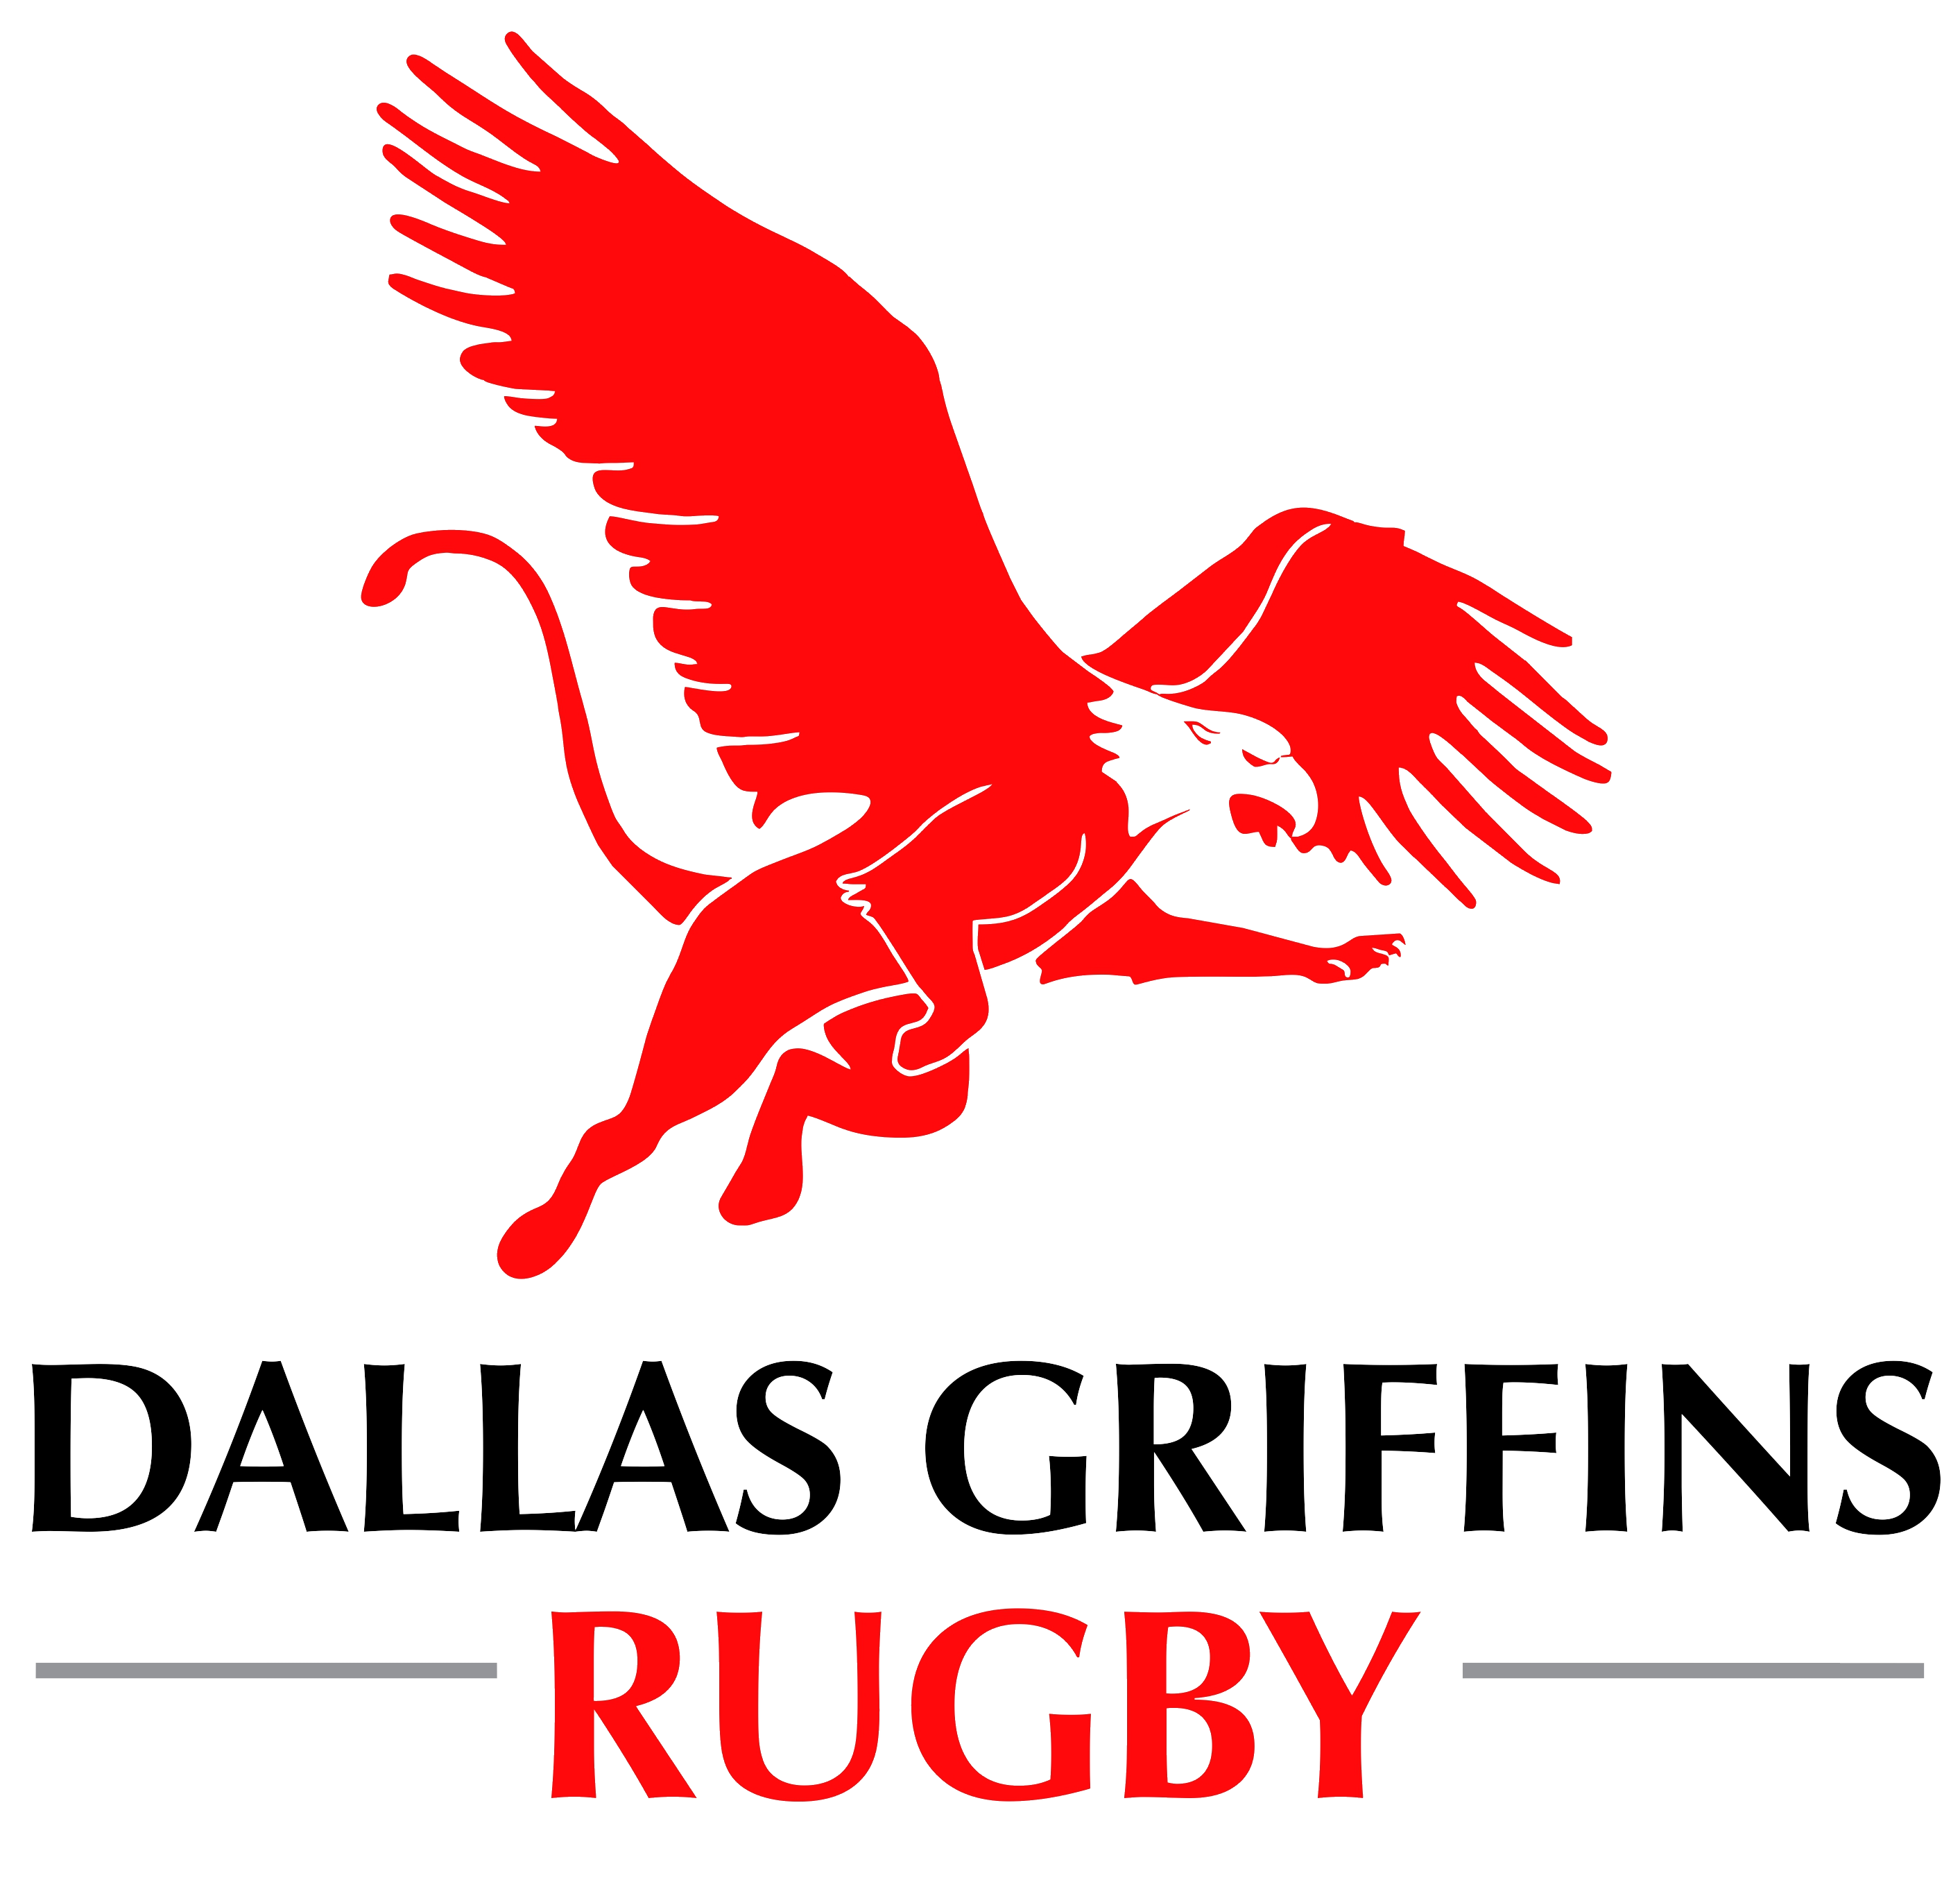 City Rugby Area Text Kansas Bath Glendale PNG Image